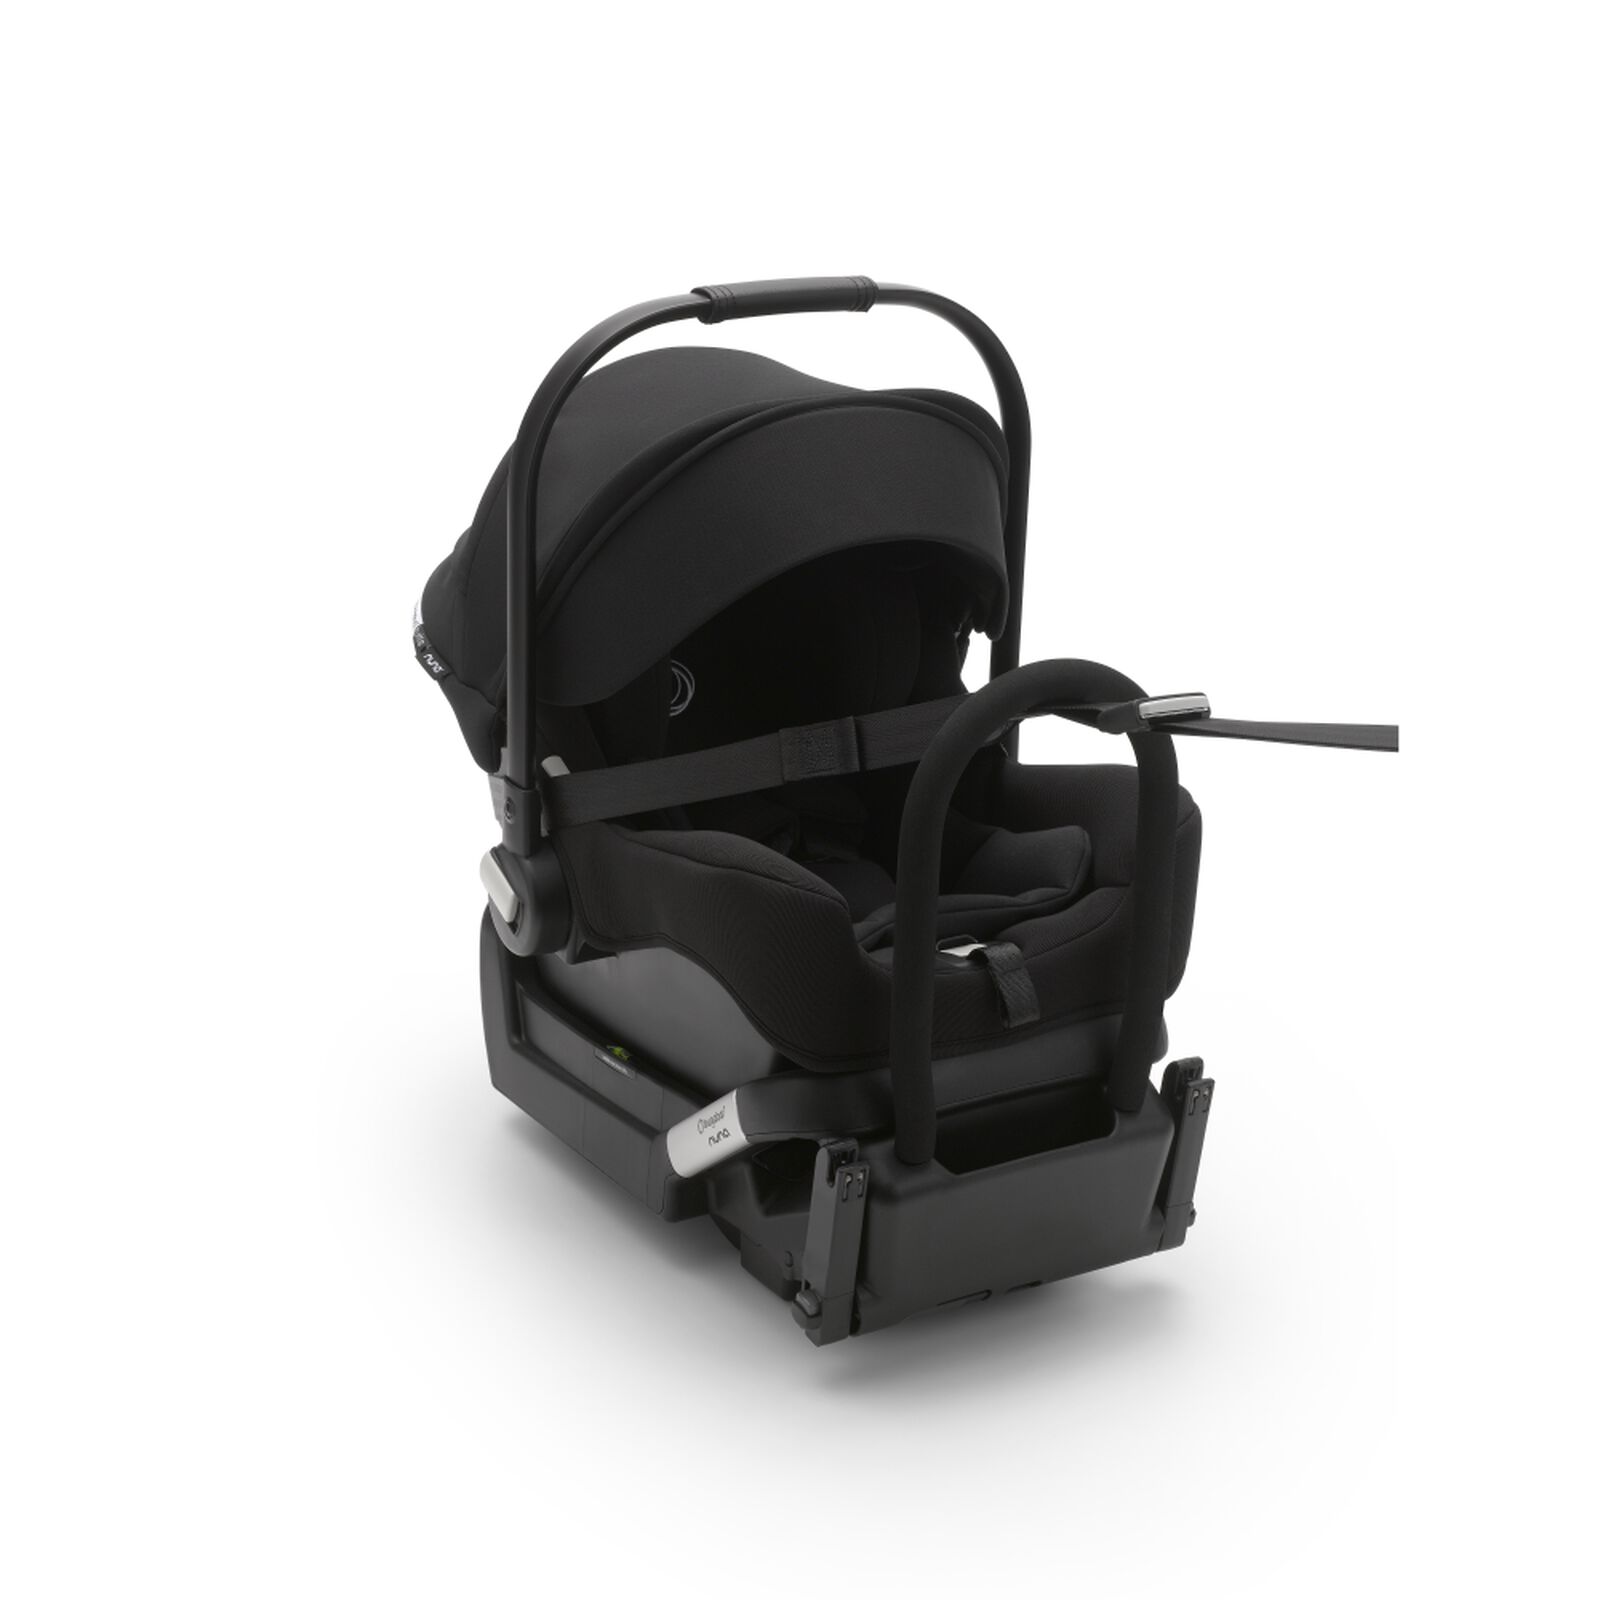 Bugaboo Turtle by Nuna baby capsule with Isofix base - View 1